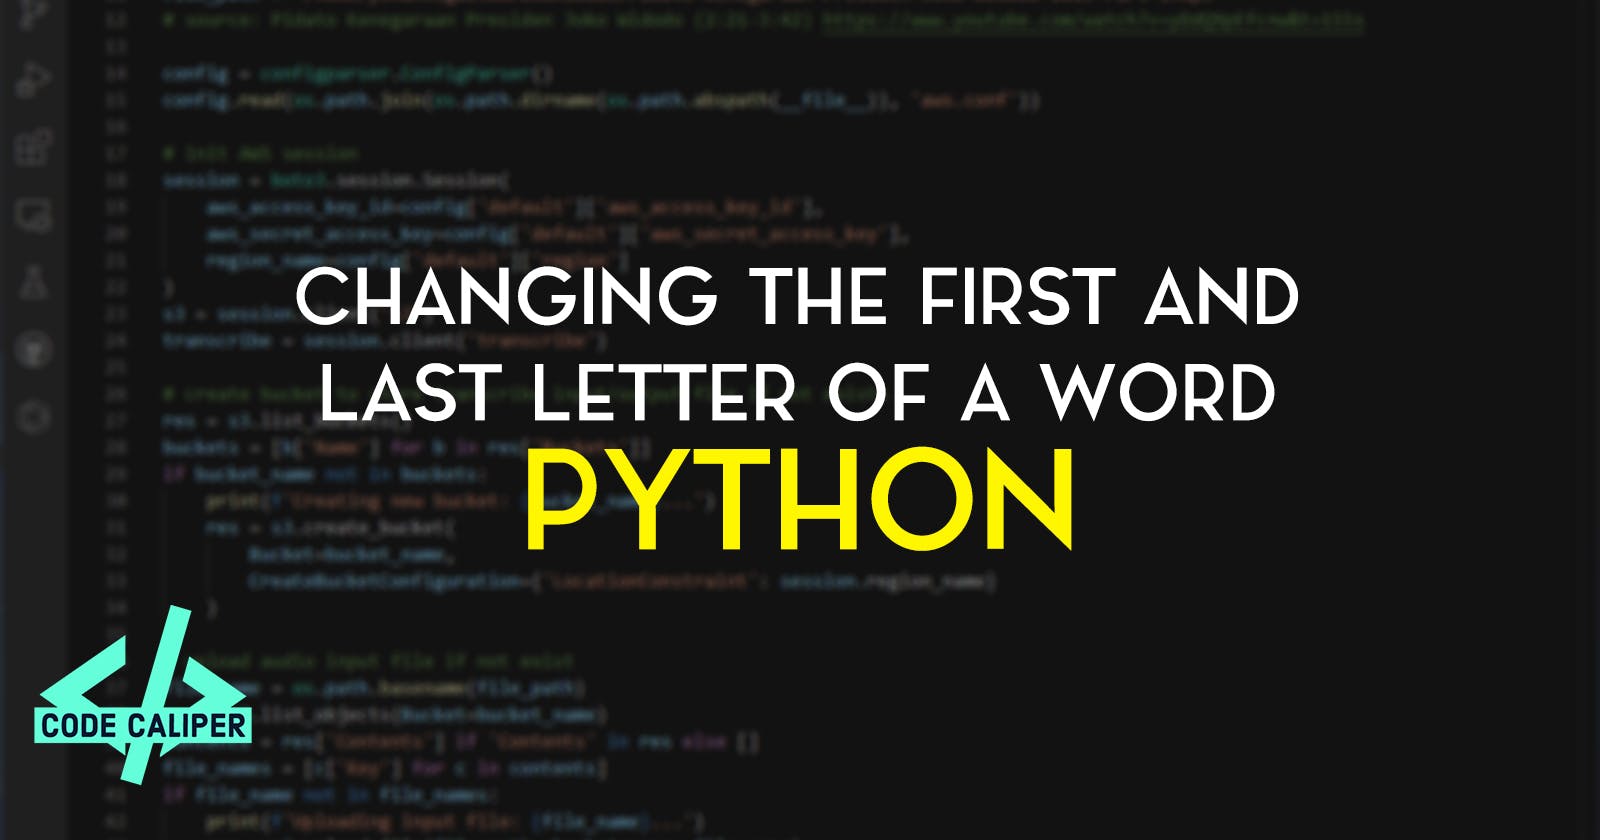 Changing the First and Last Letter of a Word in Python